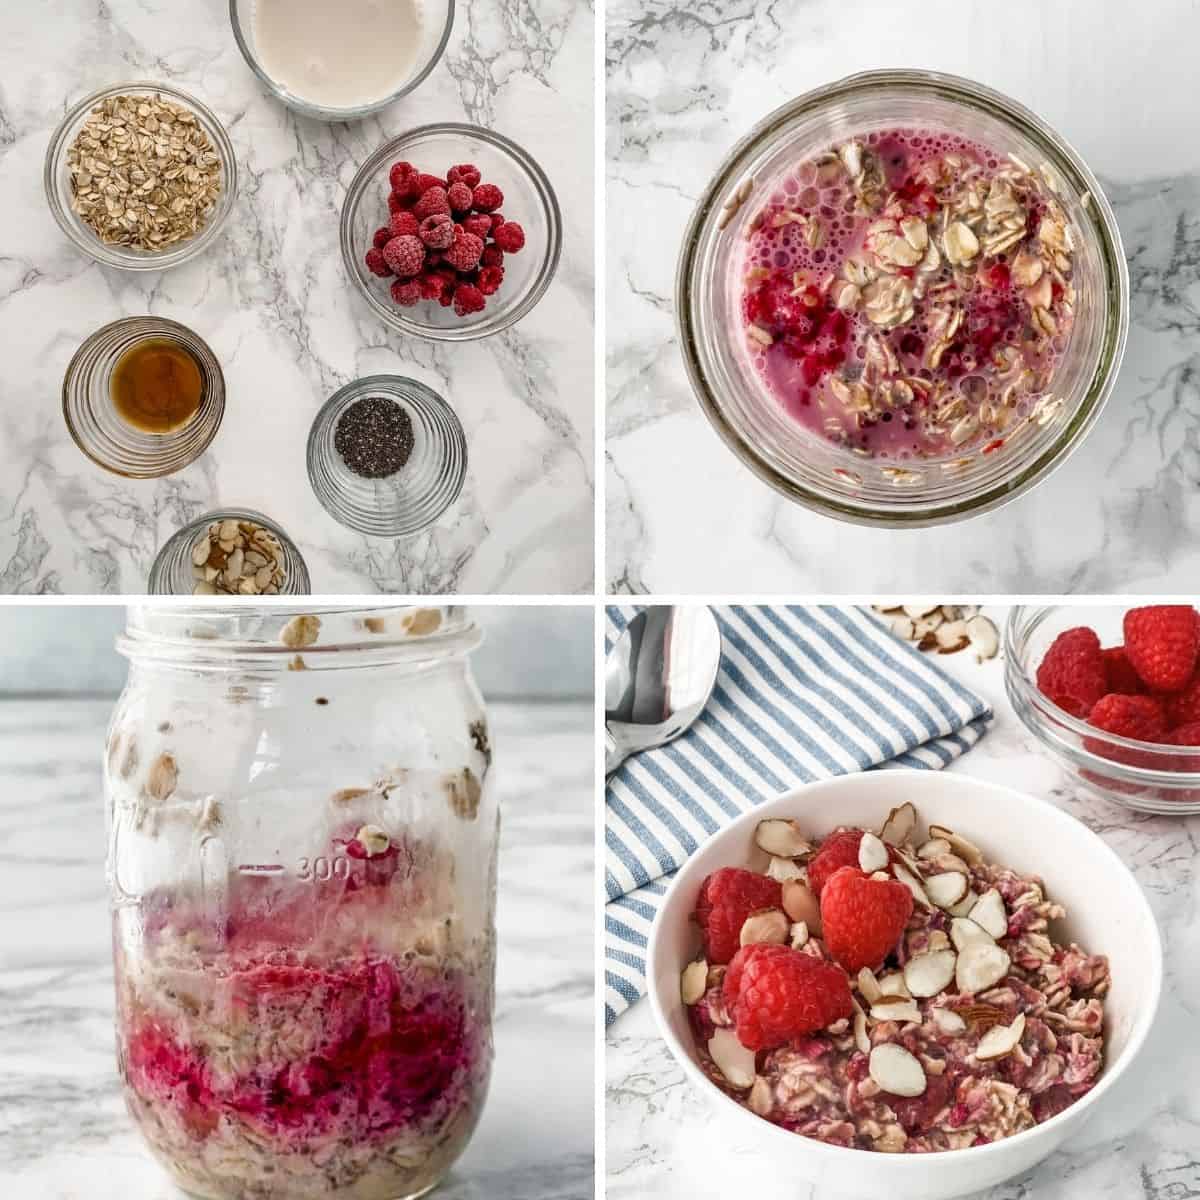 A step-by-step collage showing how to make Raspberry Overnight Oats.